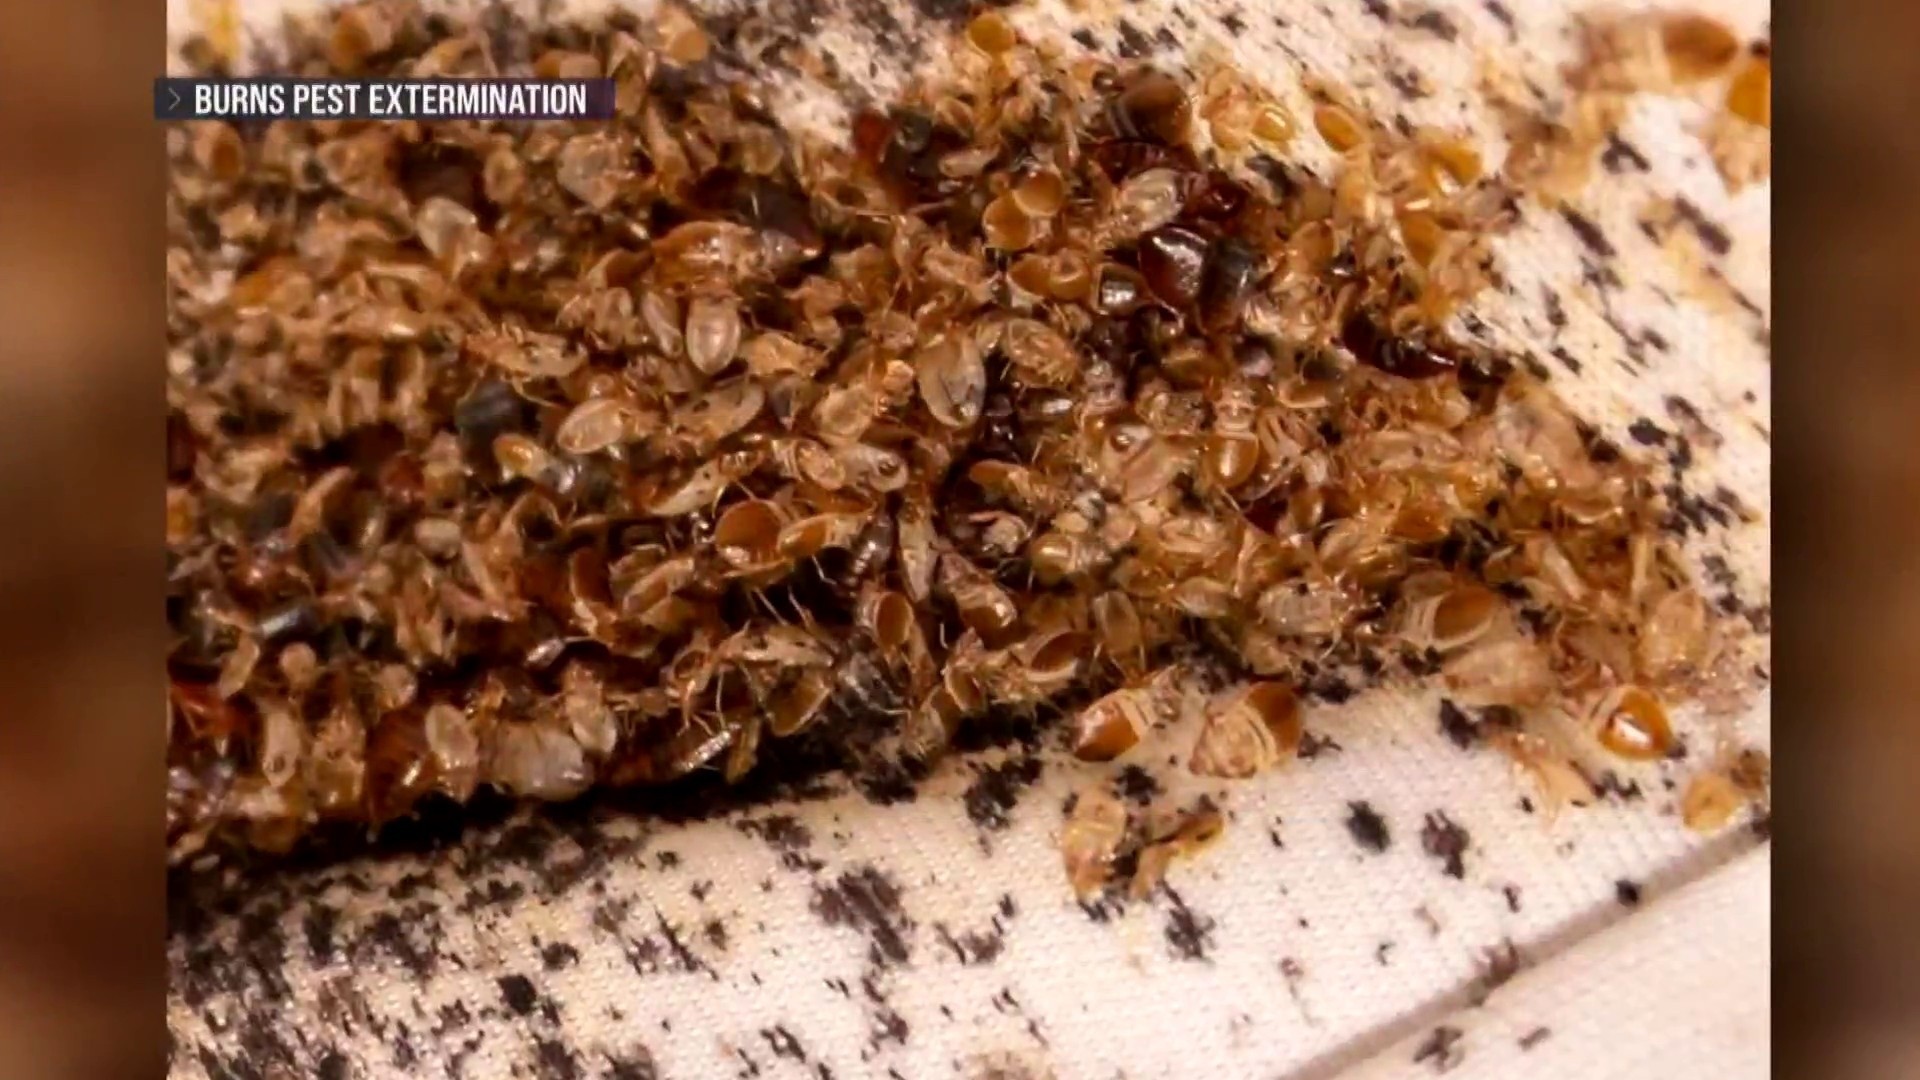 Bed bug infestation sweeps Paris with concerns the pests will